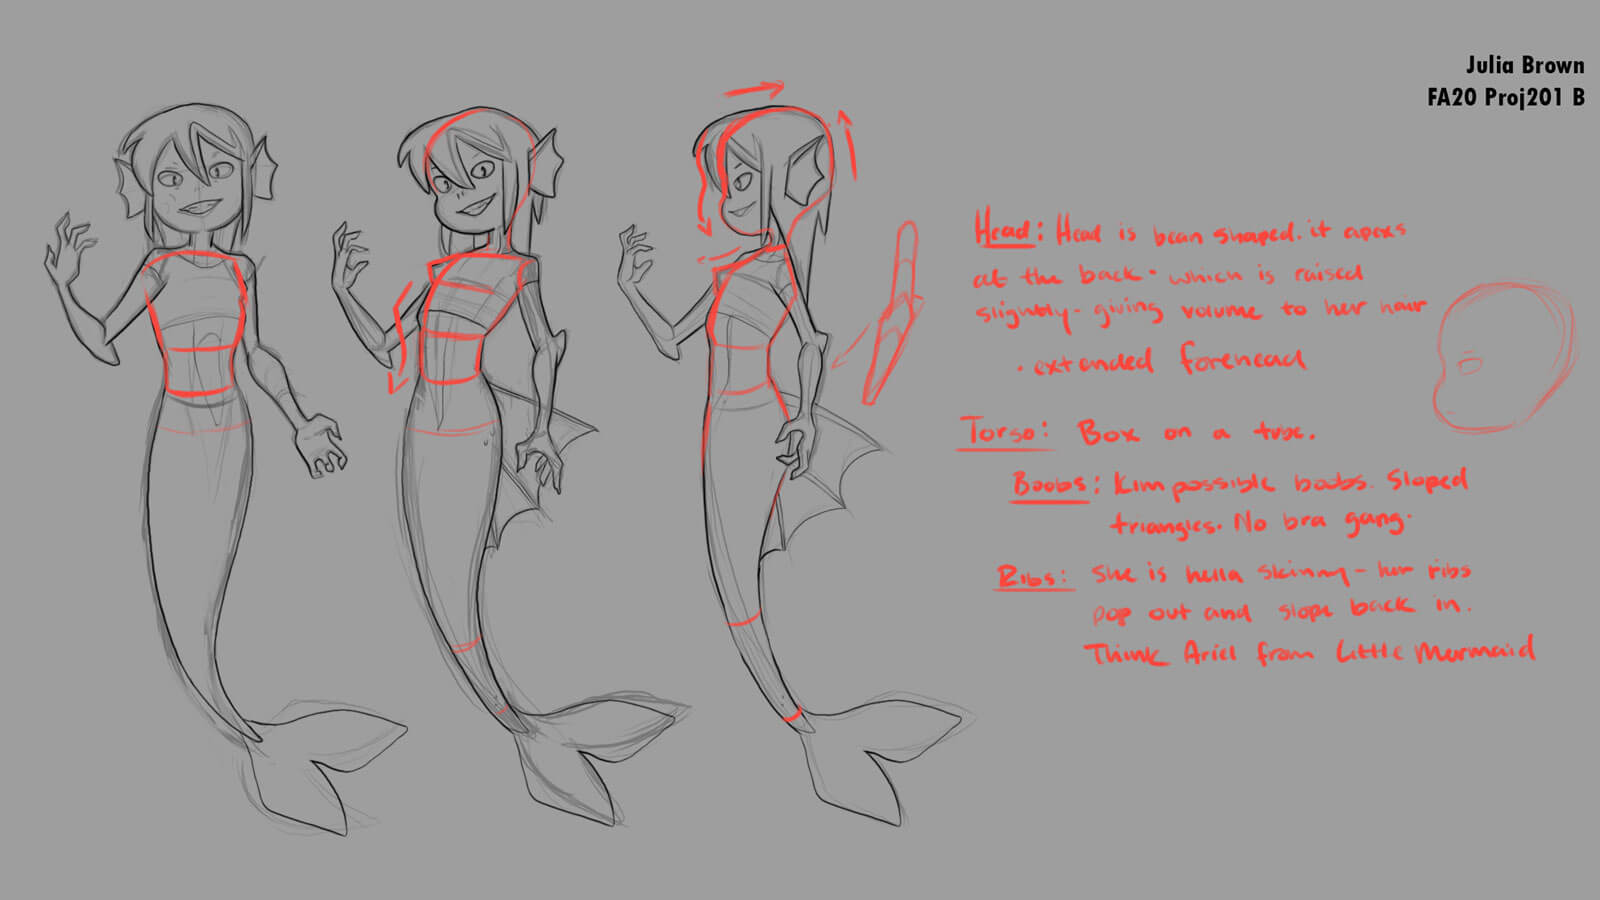 Full-body sketches with notes for a mermaid character